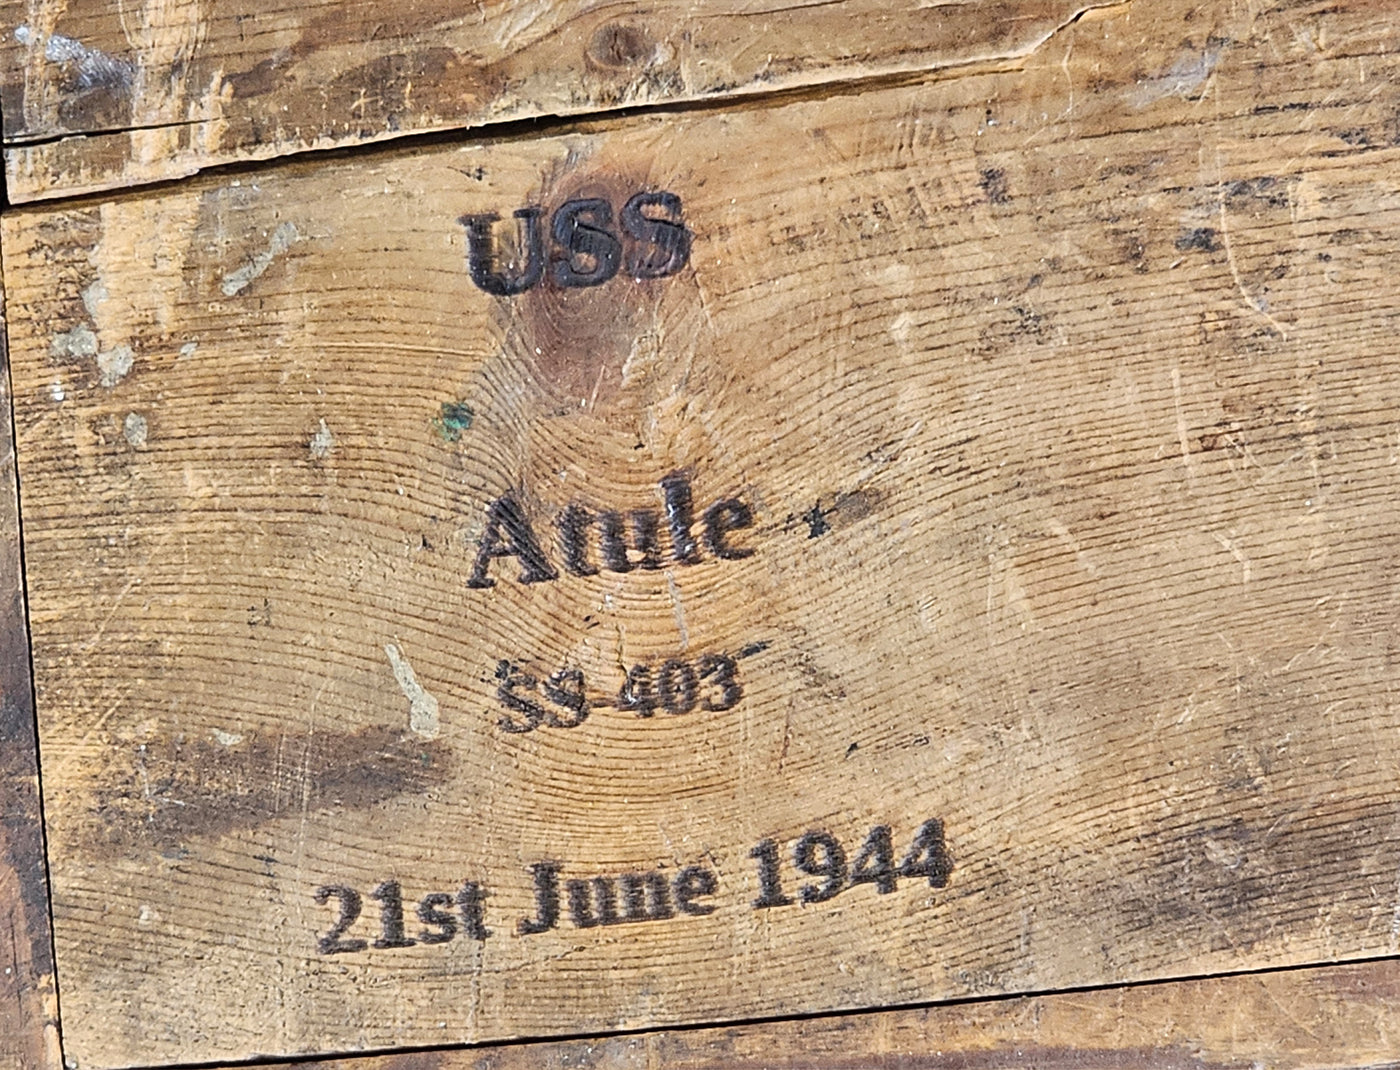 Close up photo of relic showing it's from the USS Atule.